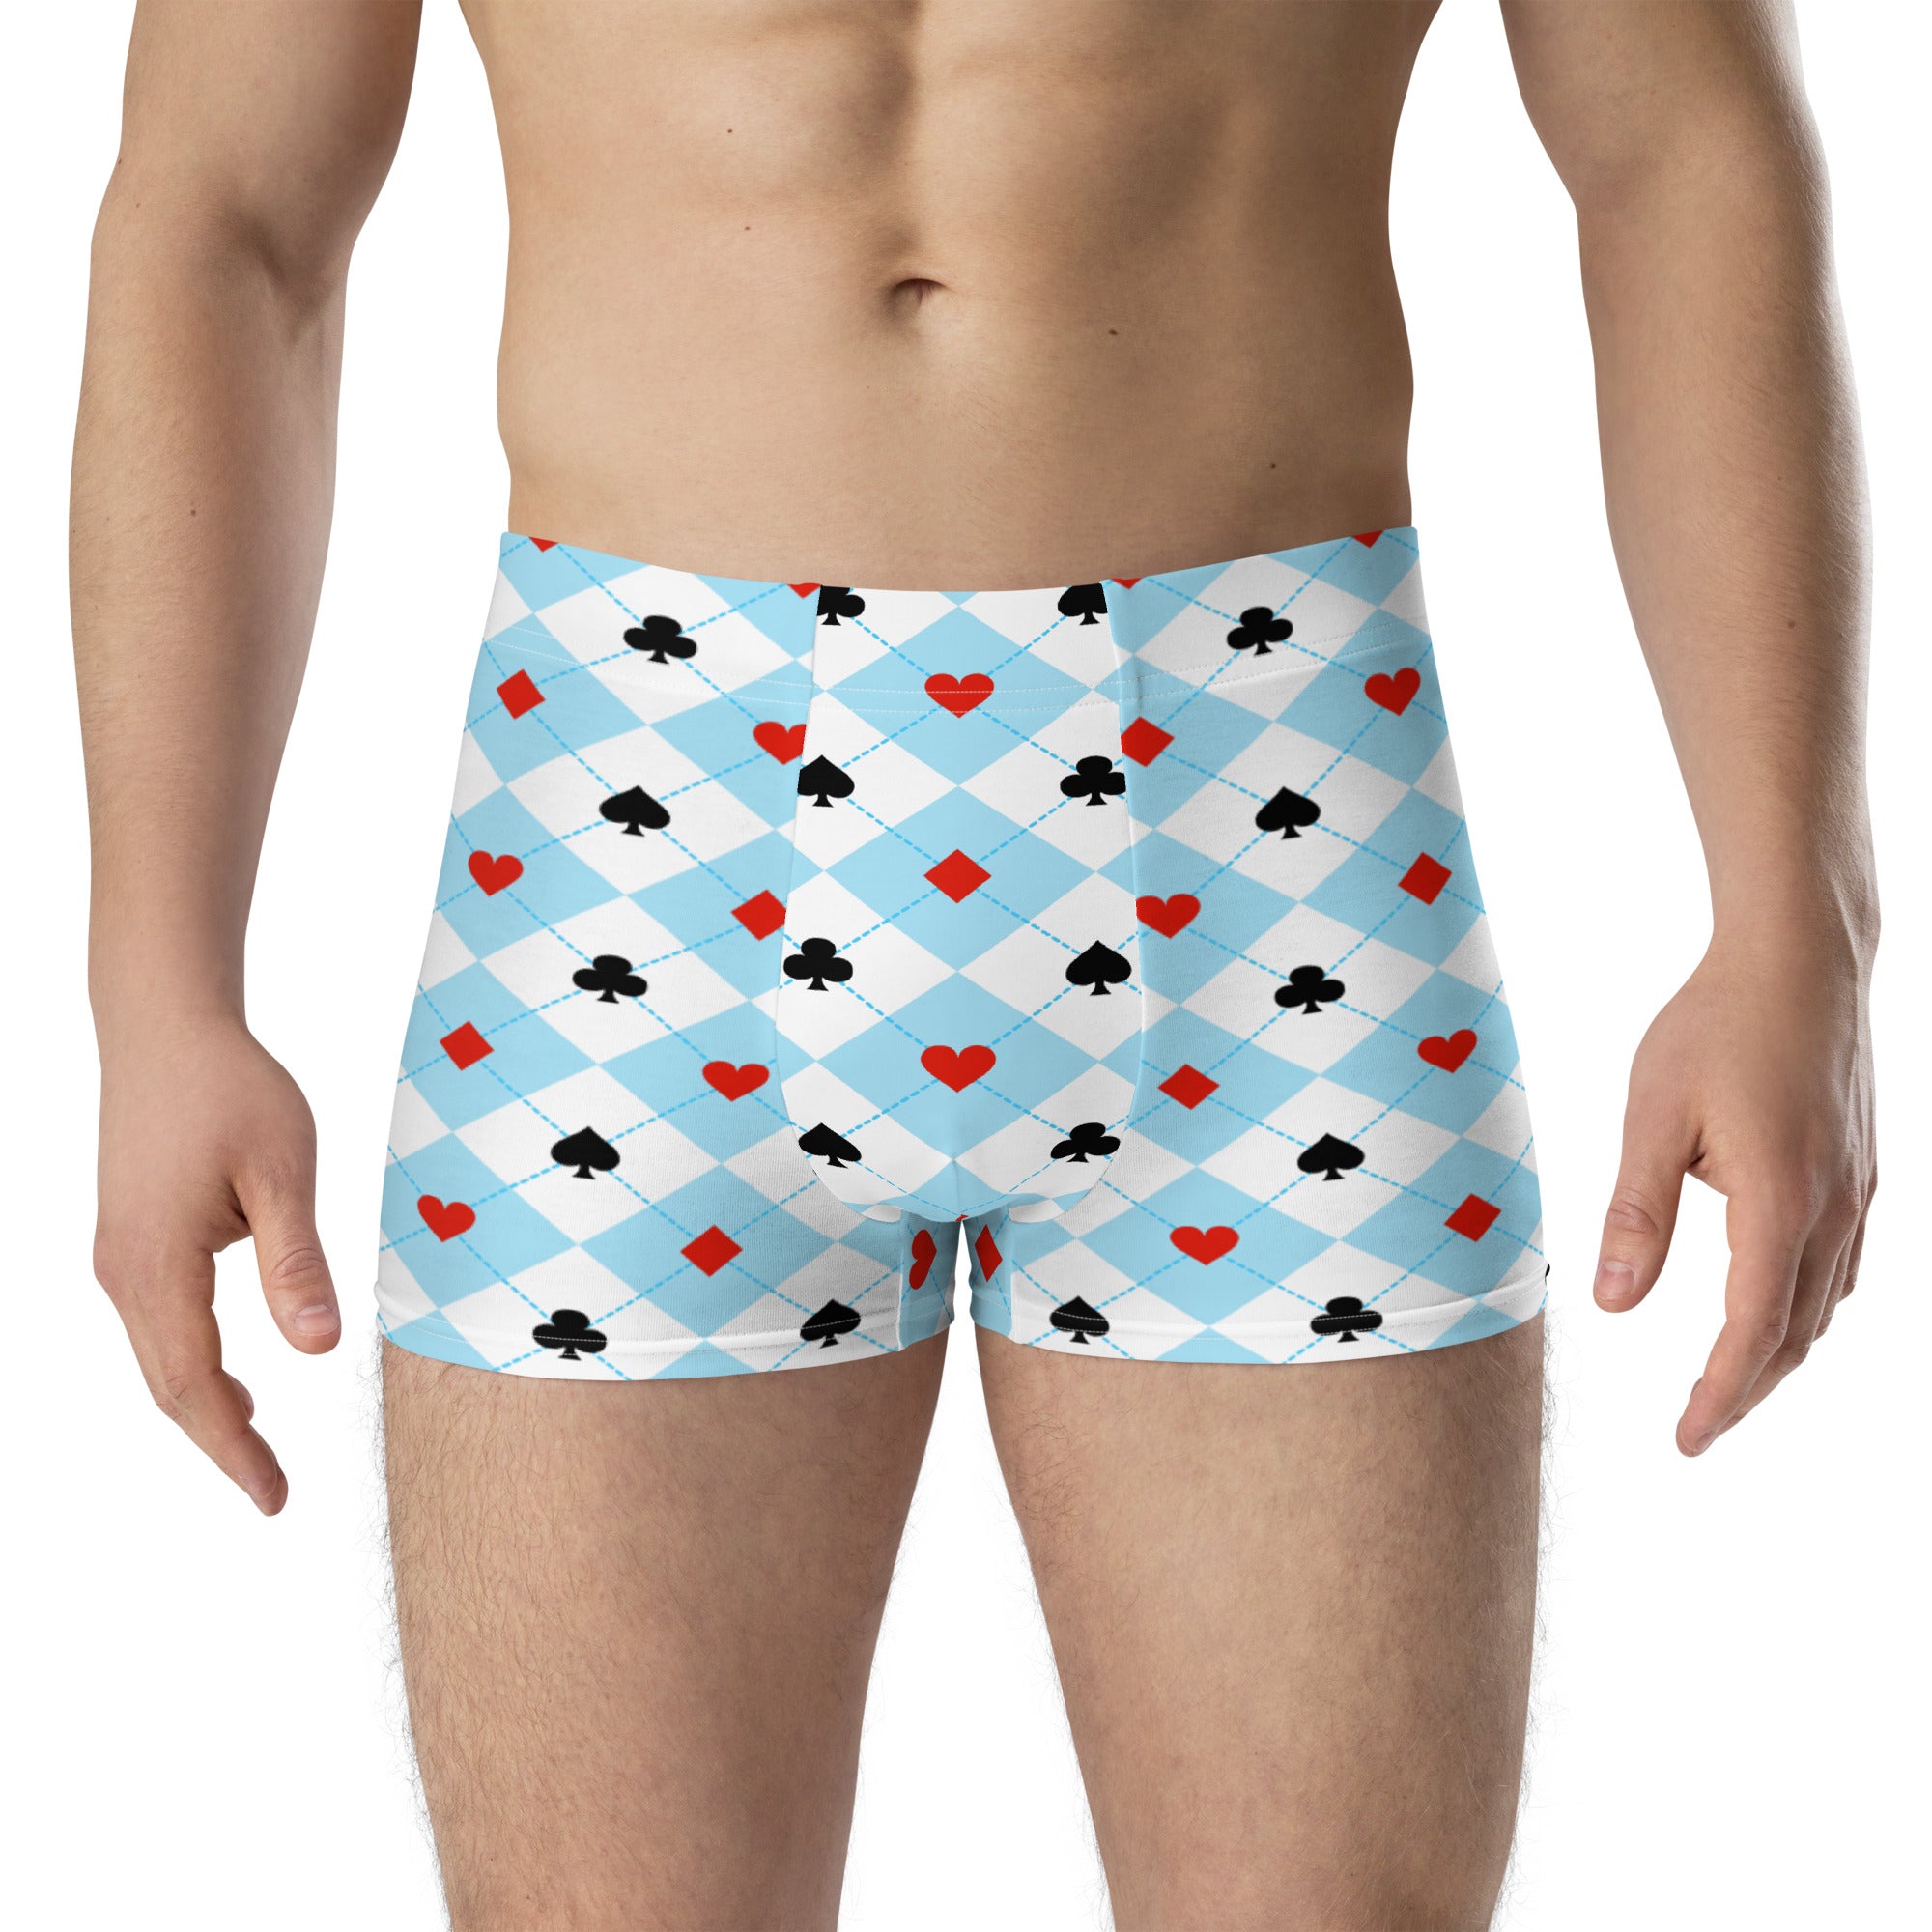 Chess-inspired boxer briefs for men's fashion